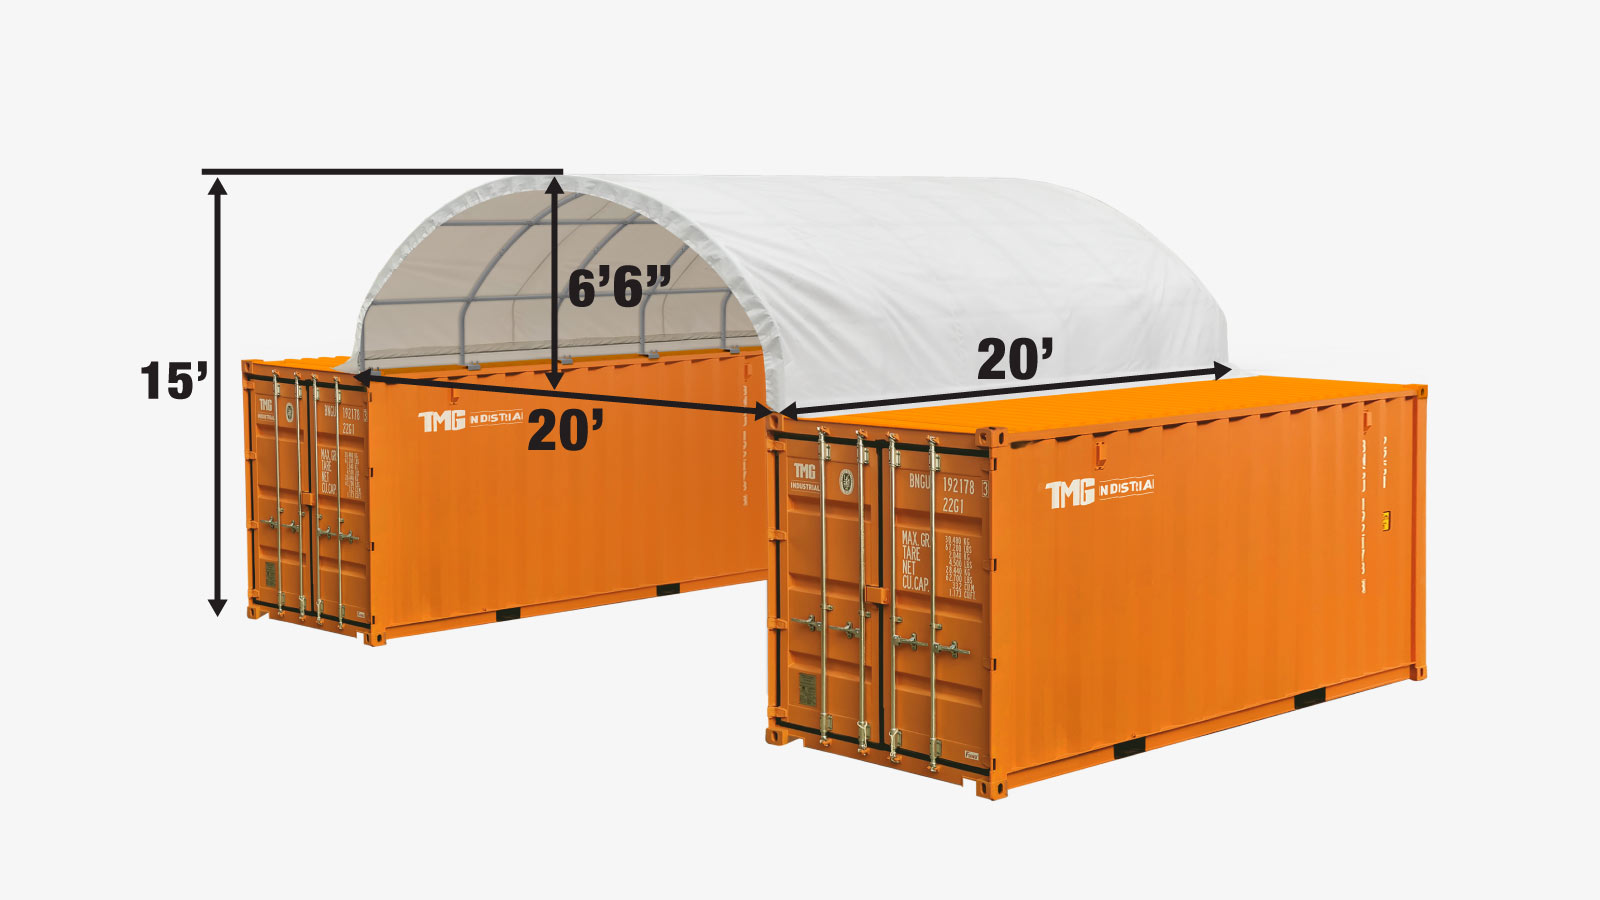 TMG Industrial 20' x 20' PE Fabric Container Shelter, Fire Retardant, Water Resistant, UV Protected, TMG-ST2021CE(Previously ST2020C)-specifications-image